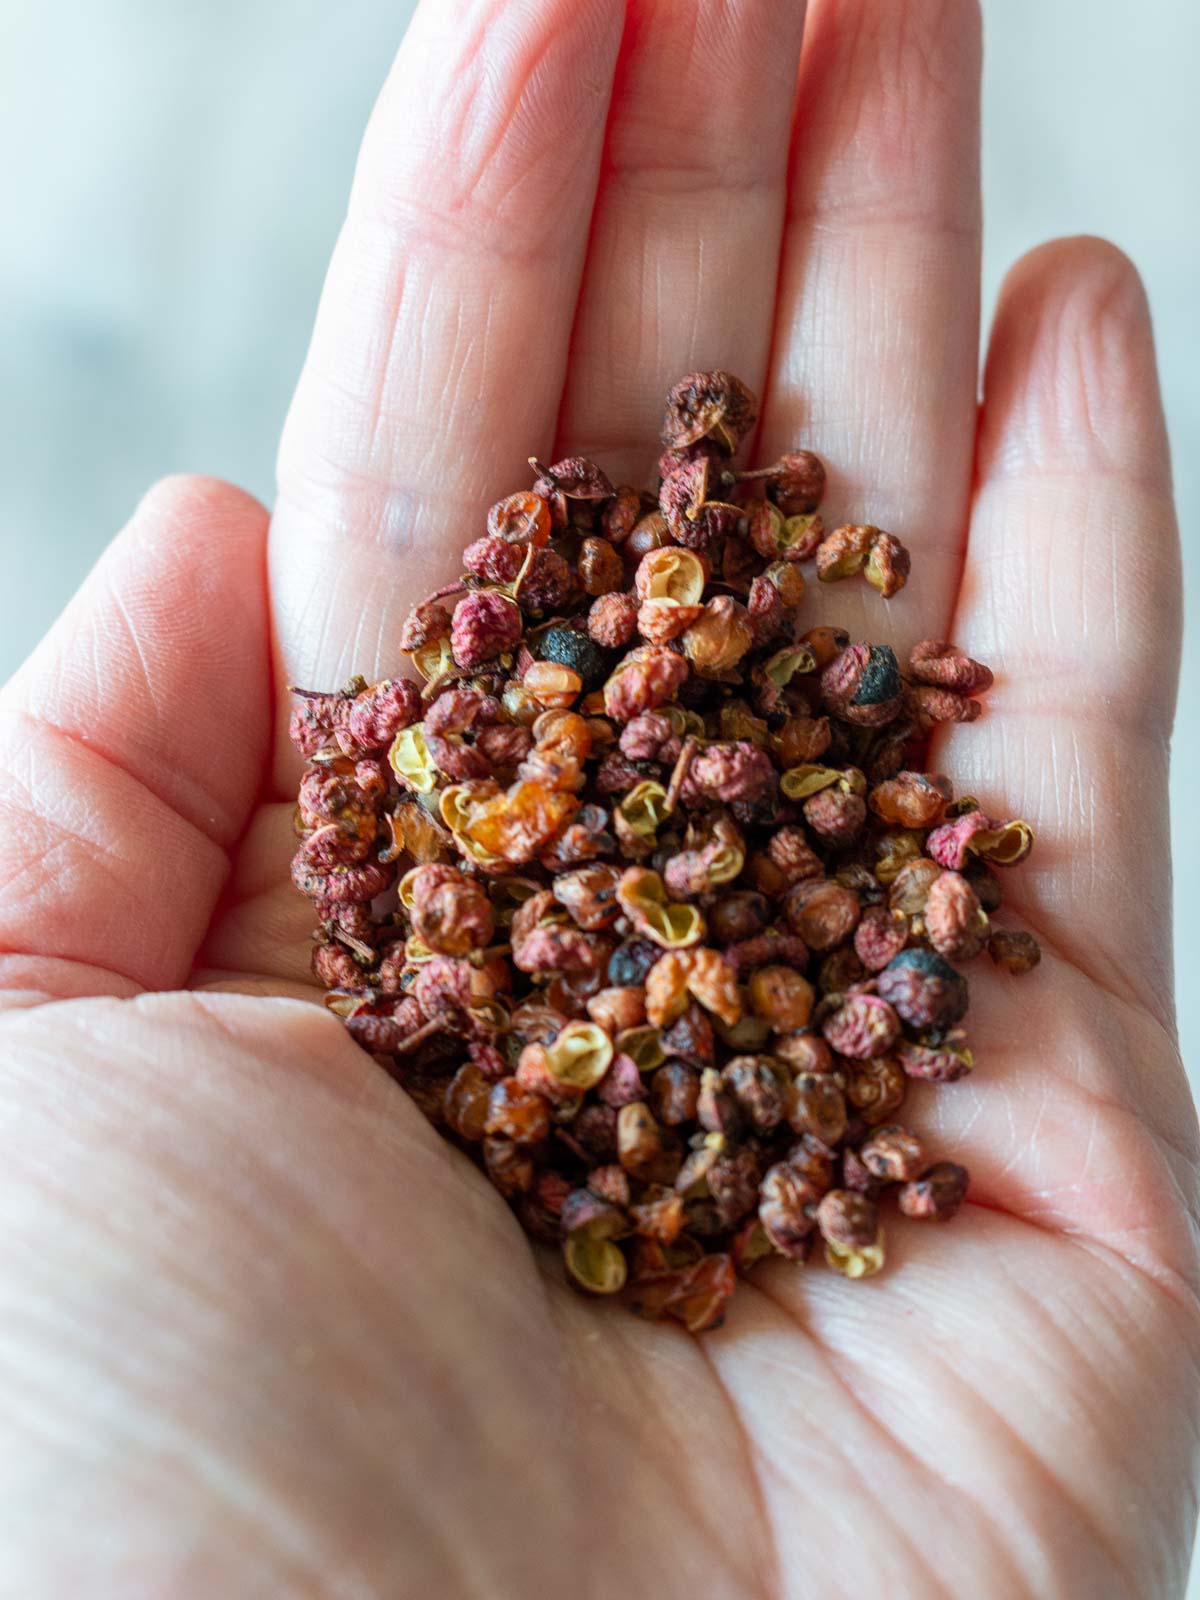 Whole Sichuan peppercorns held in a hand.